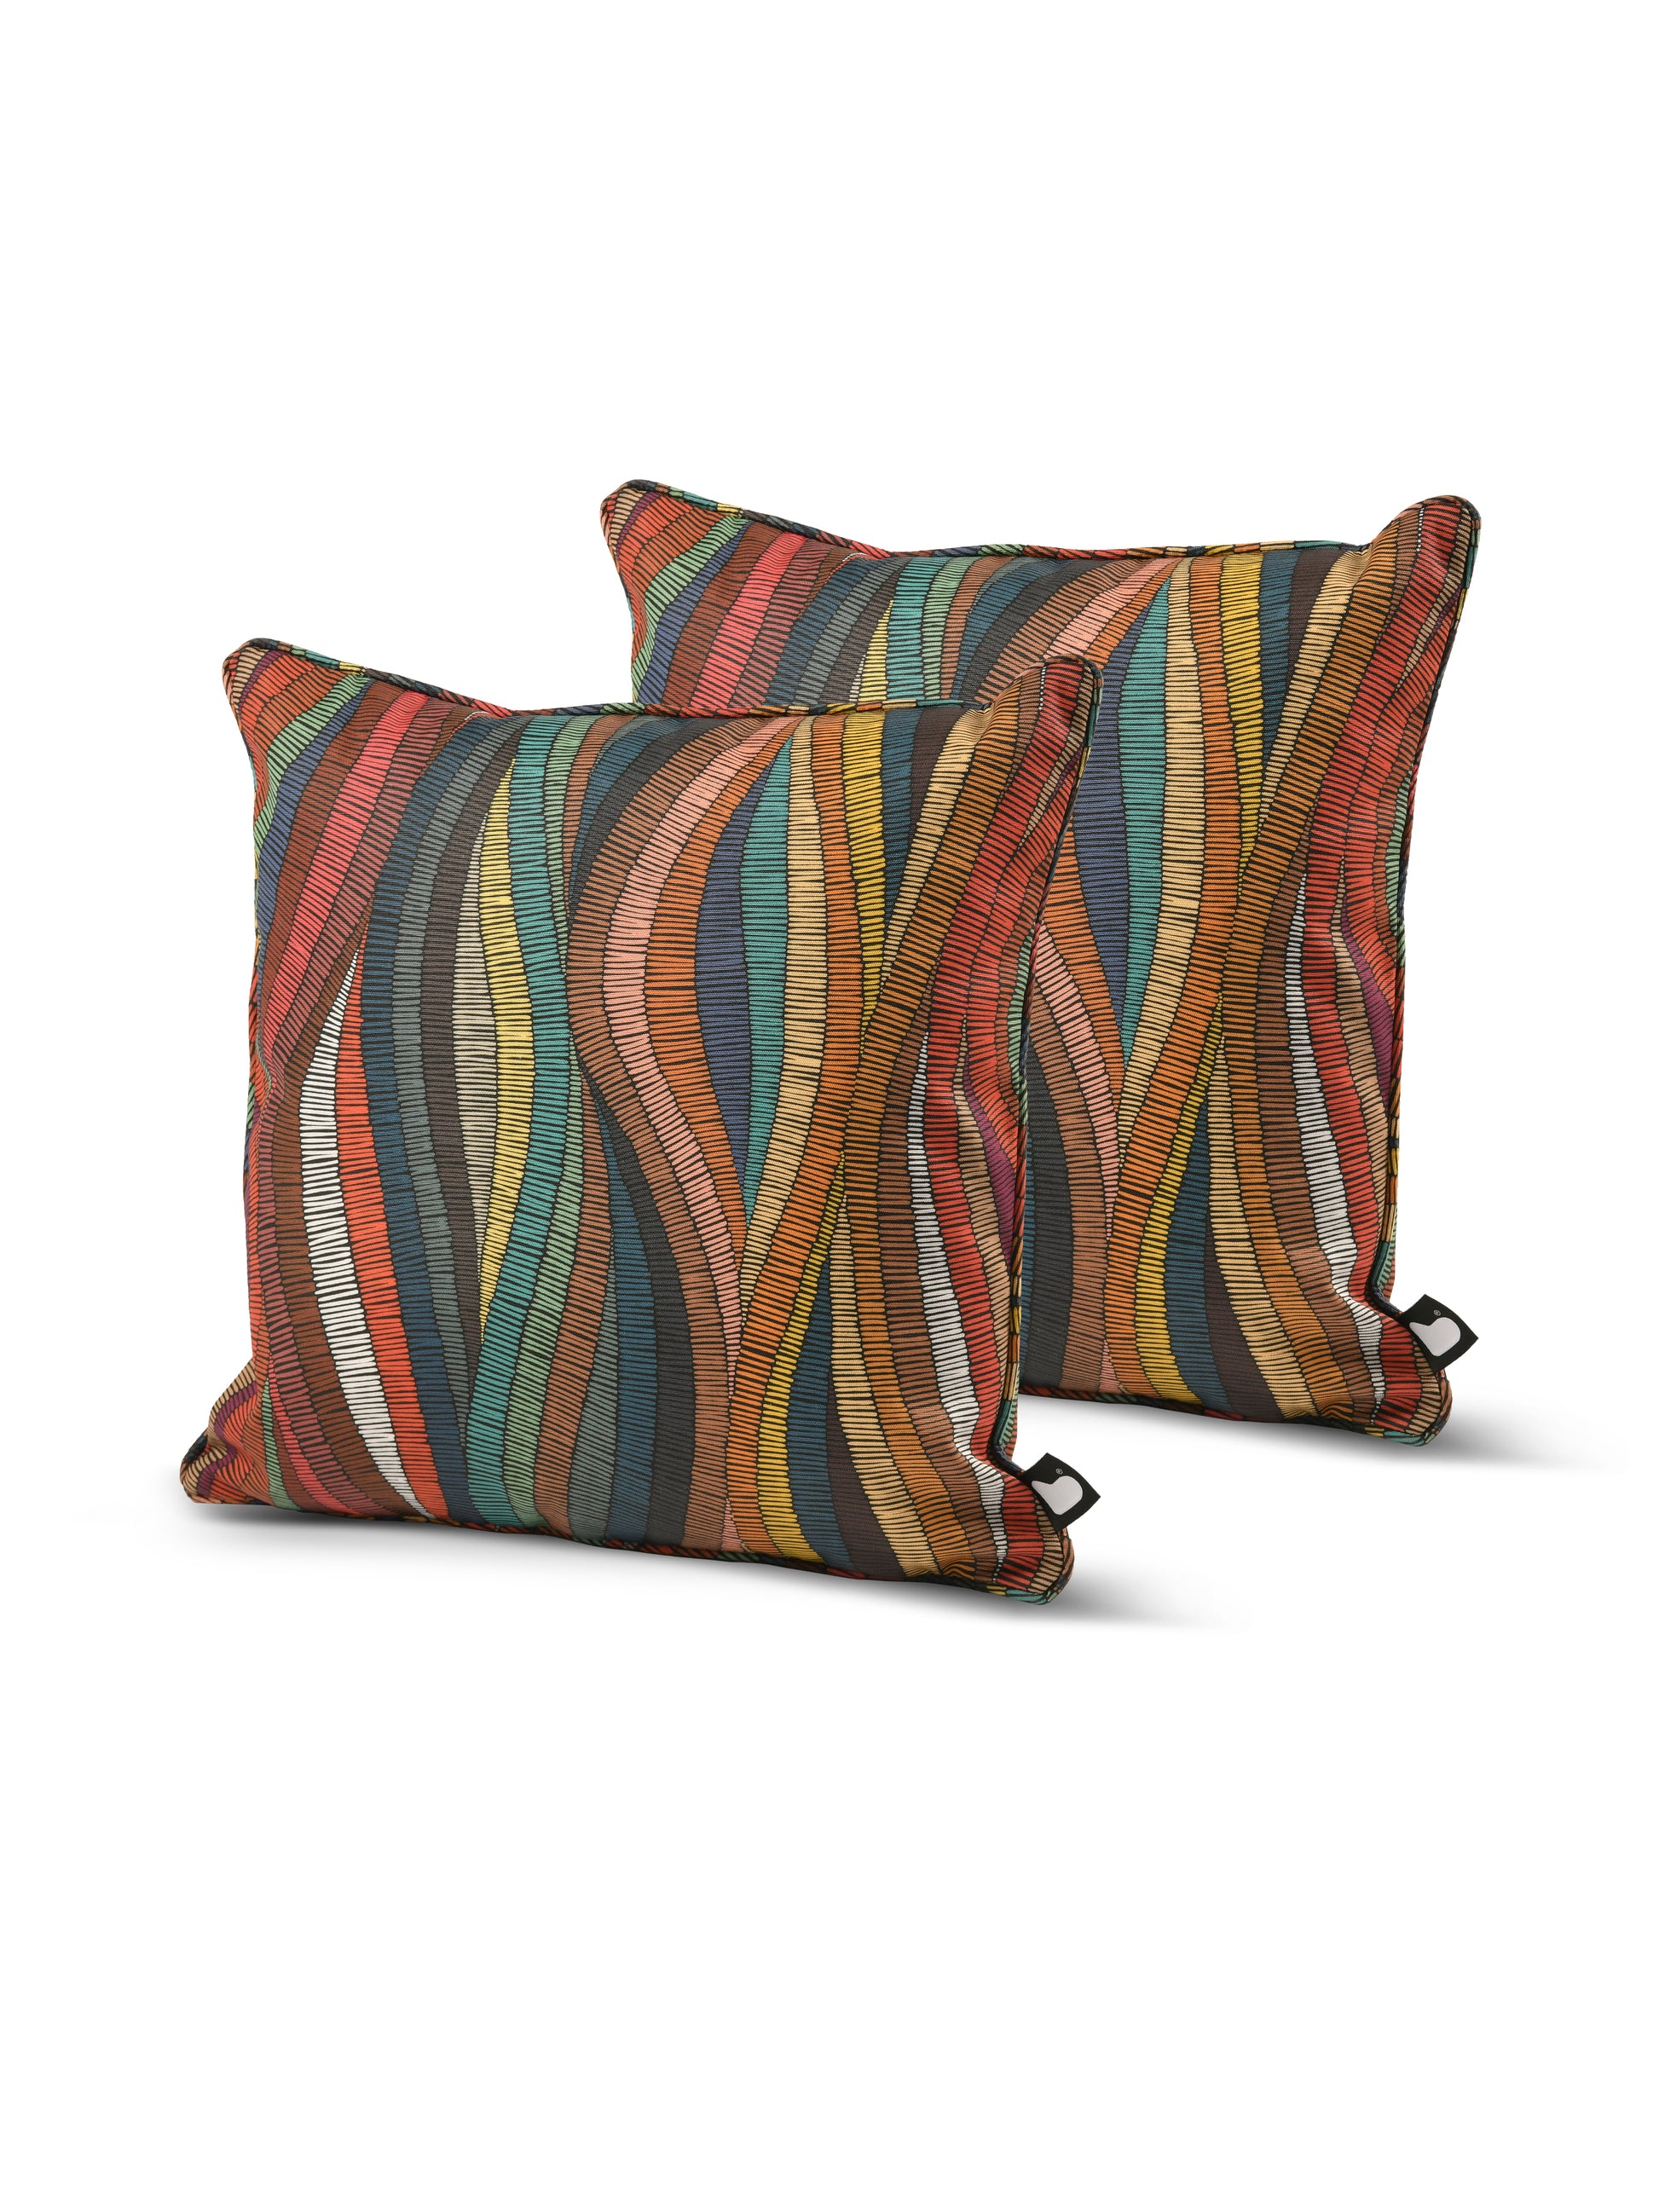 Two Brisks B Cushion Twin Pack Art Collection decorative throw pillows with a colorful, wavy stripe pattern in hues of orange, red, yellow, green, blue, and brown. The square-shaped pillows boast a soft fabric texture and UV-resistant properties, set against a plain white background.